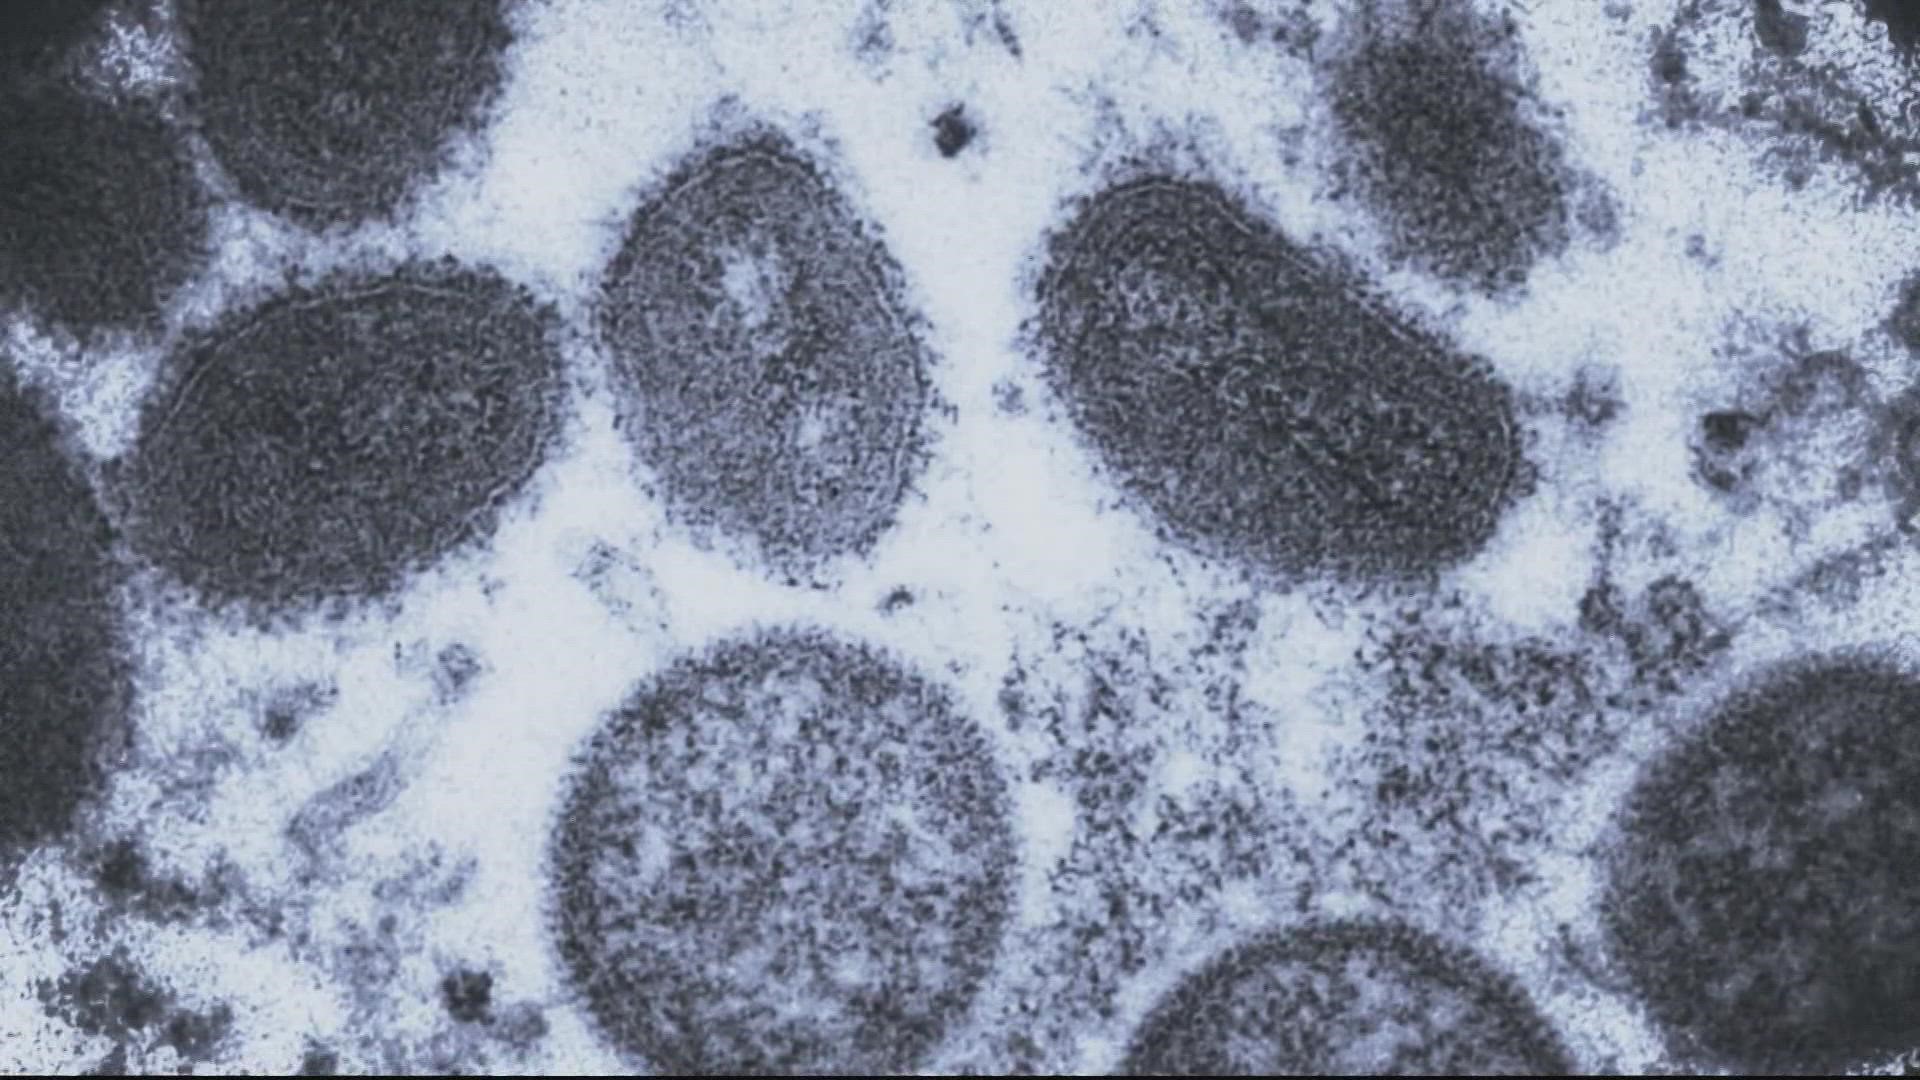 Three presumed cases of monkeypox were reported in Maryland. A case was also reported in Georgetown in D.C.